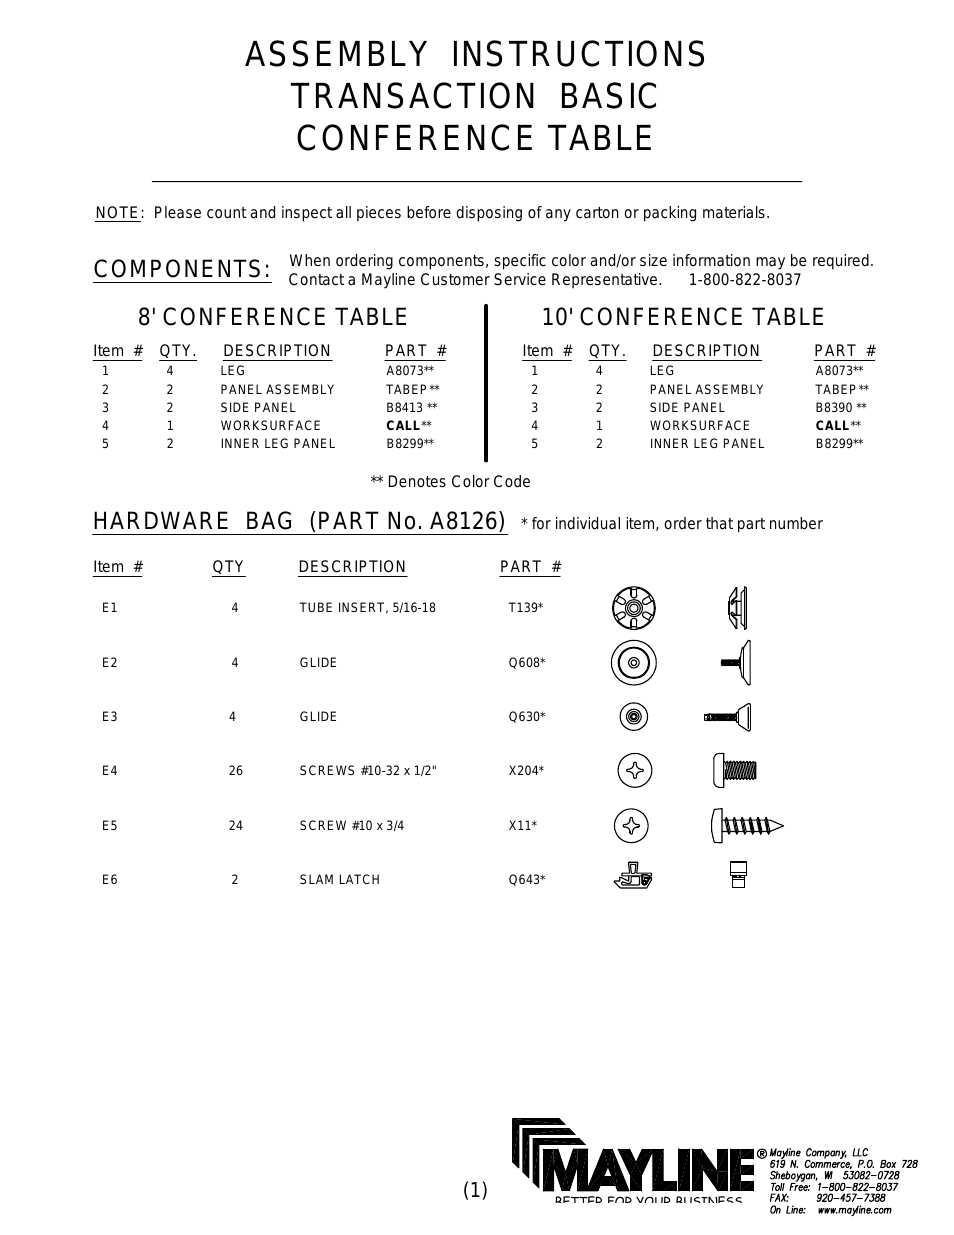 8' Basic Conference Table